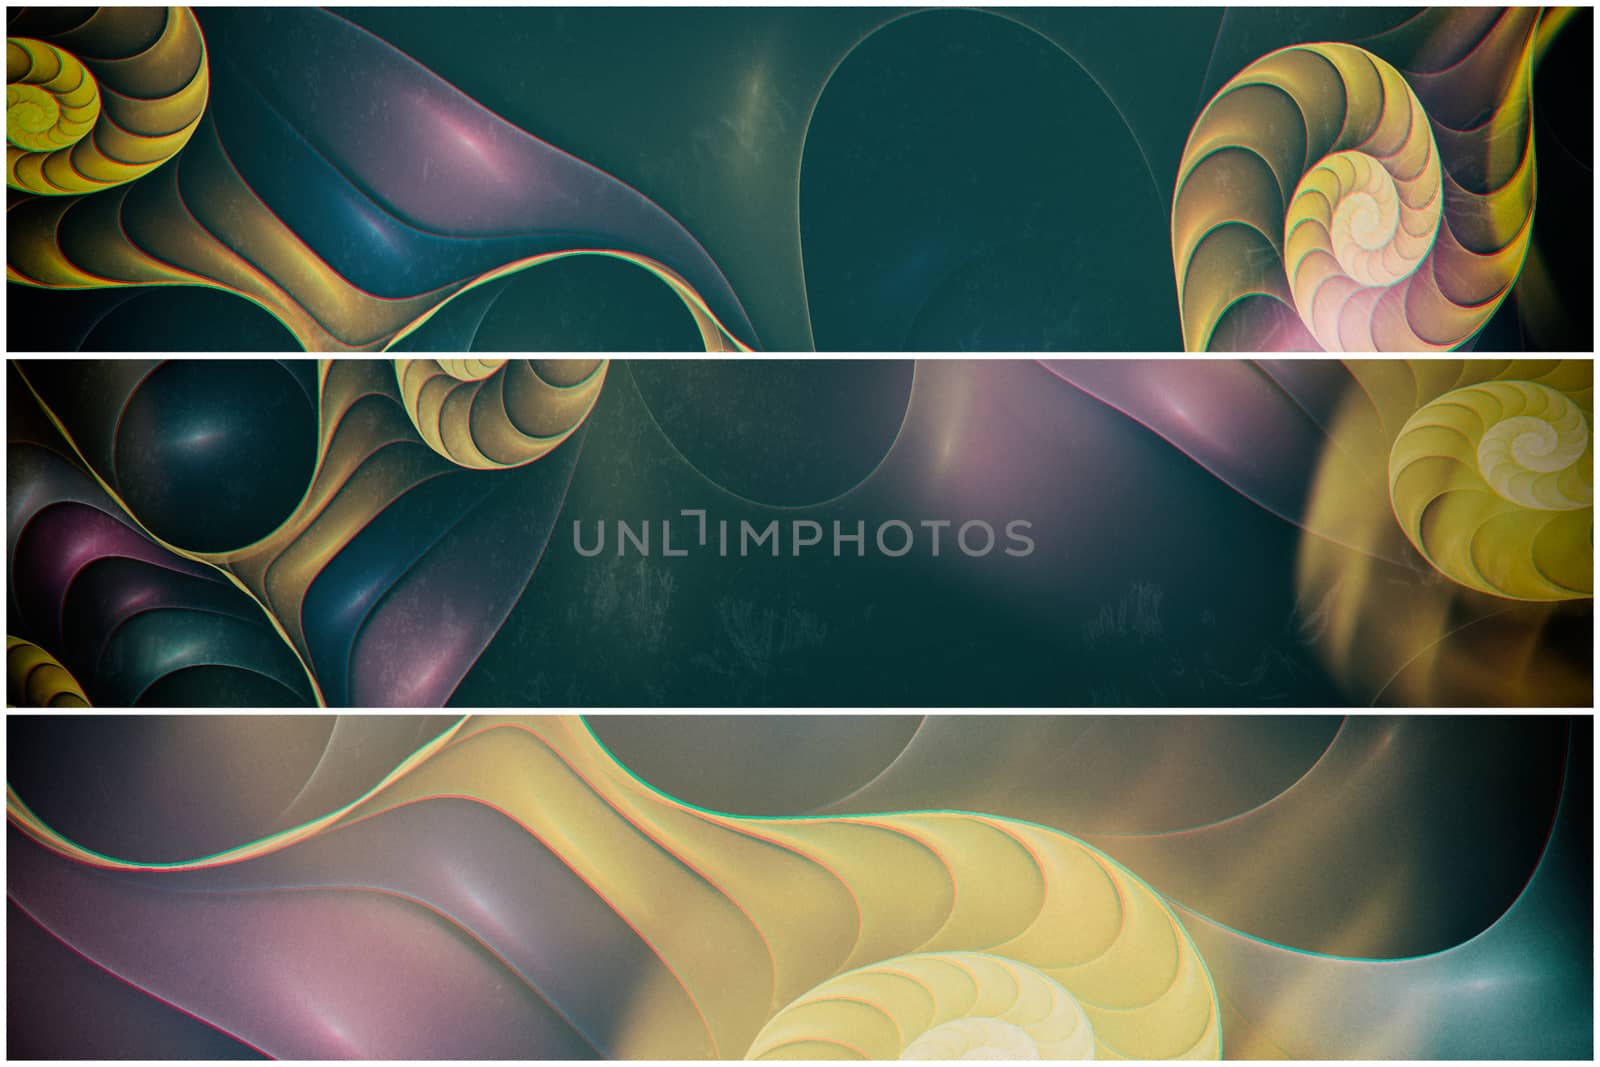 fractal abstract banners. Elements for your design